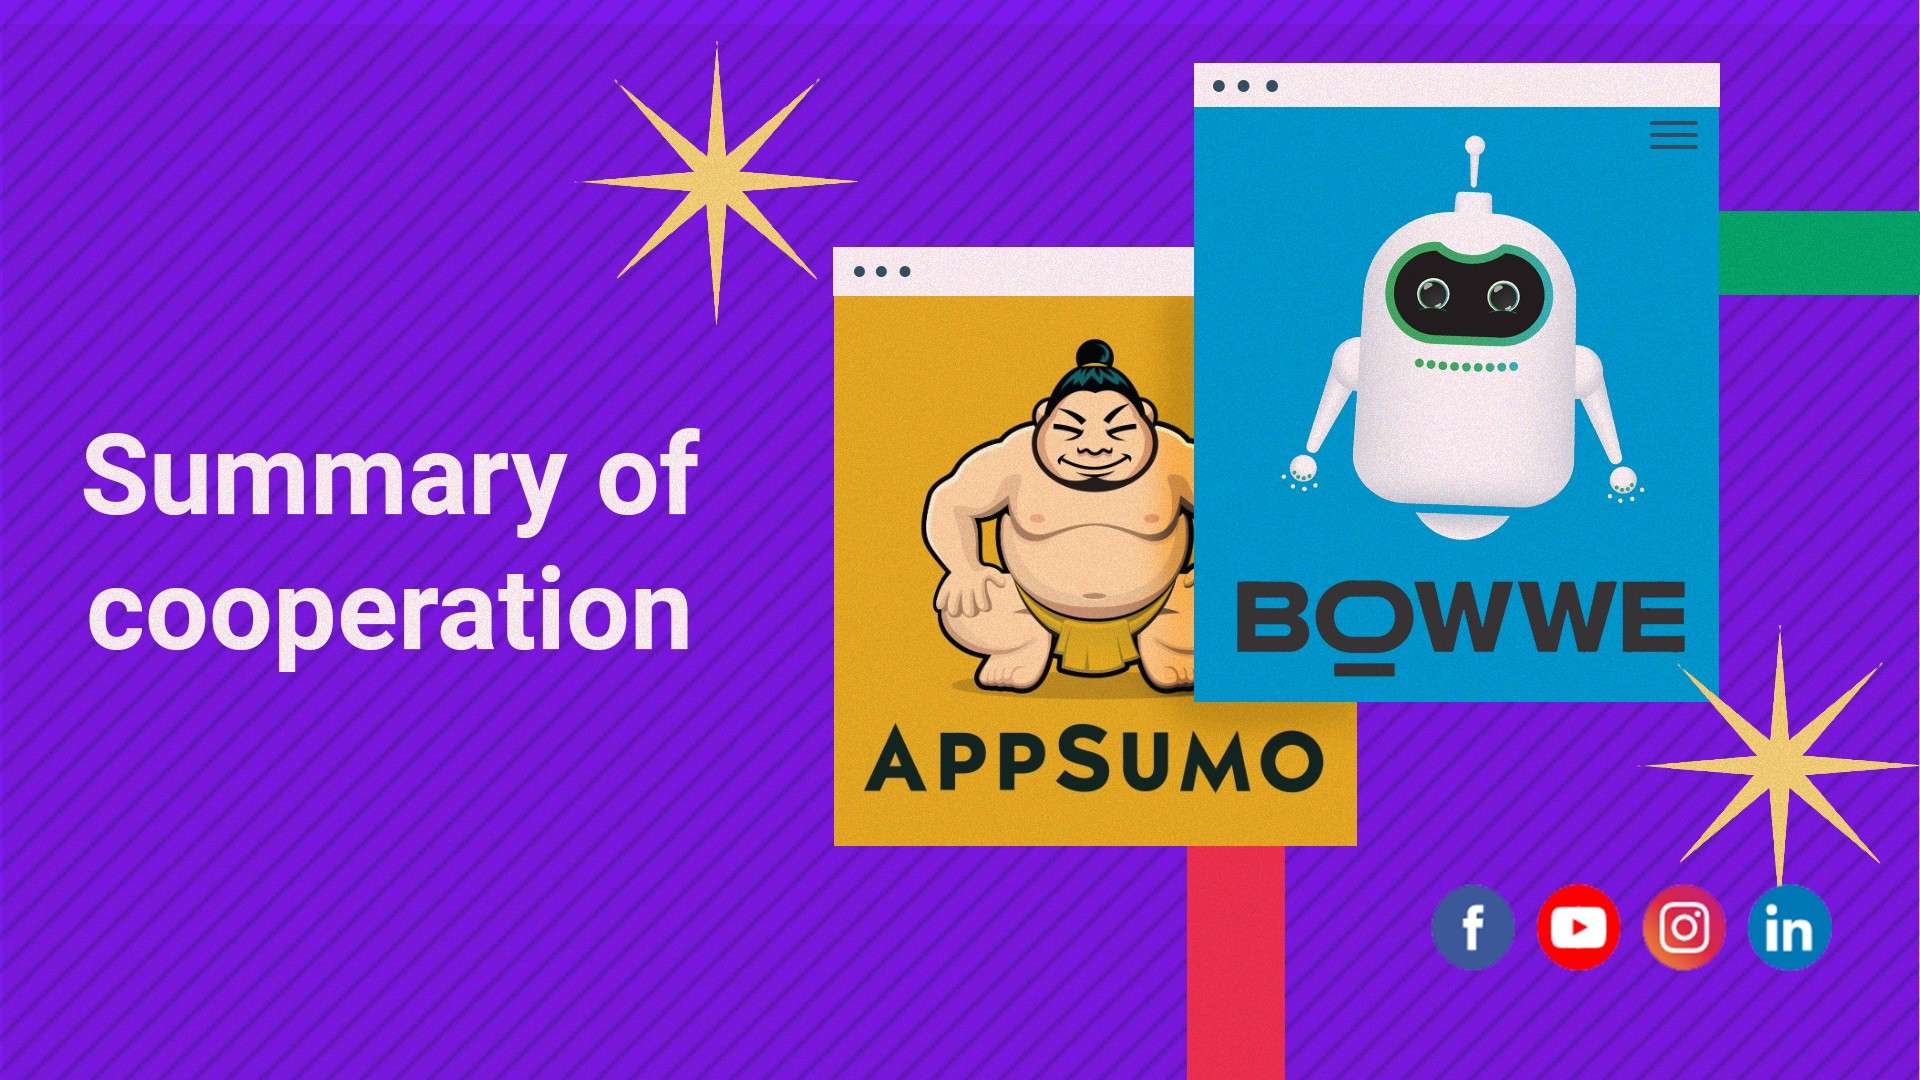 How Did BOWWE Become the Best Creator on AppSumo? [Case Study]